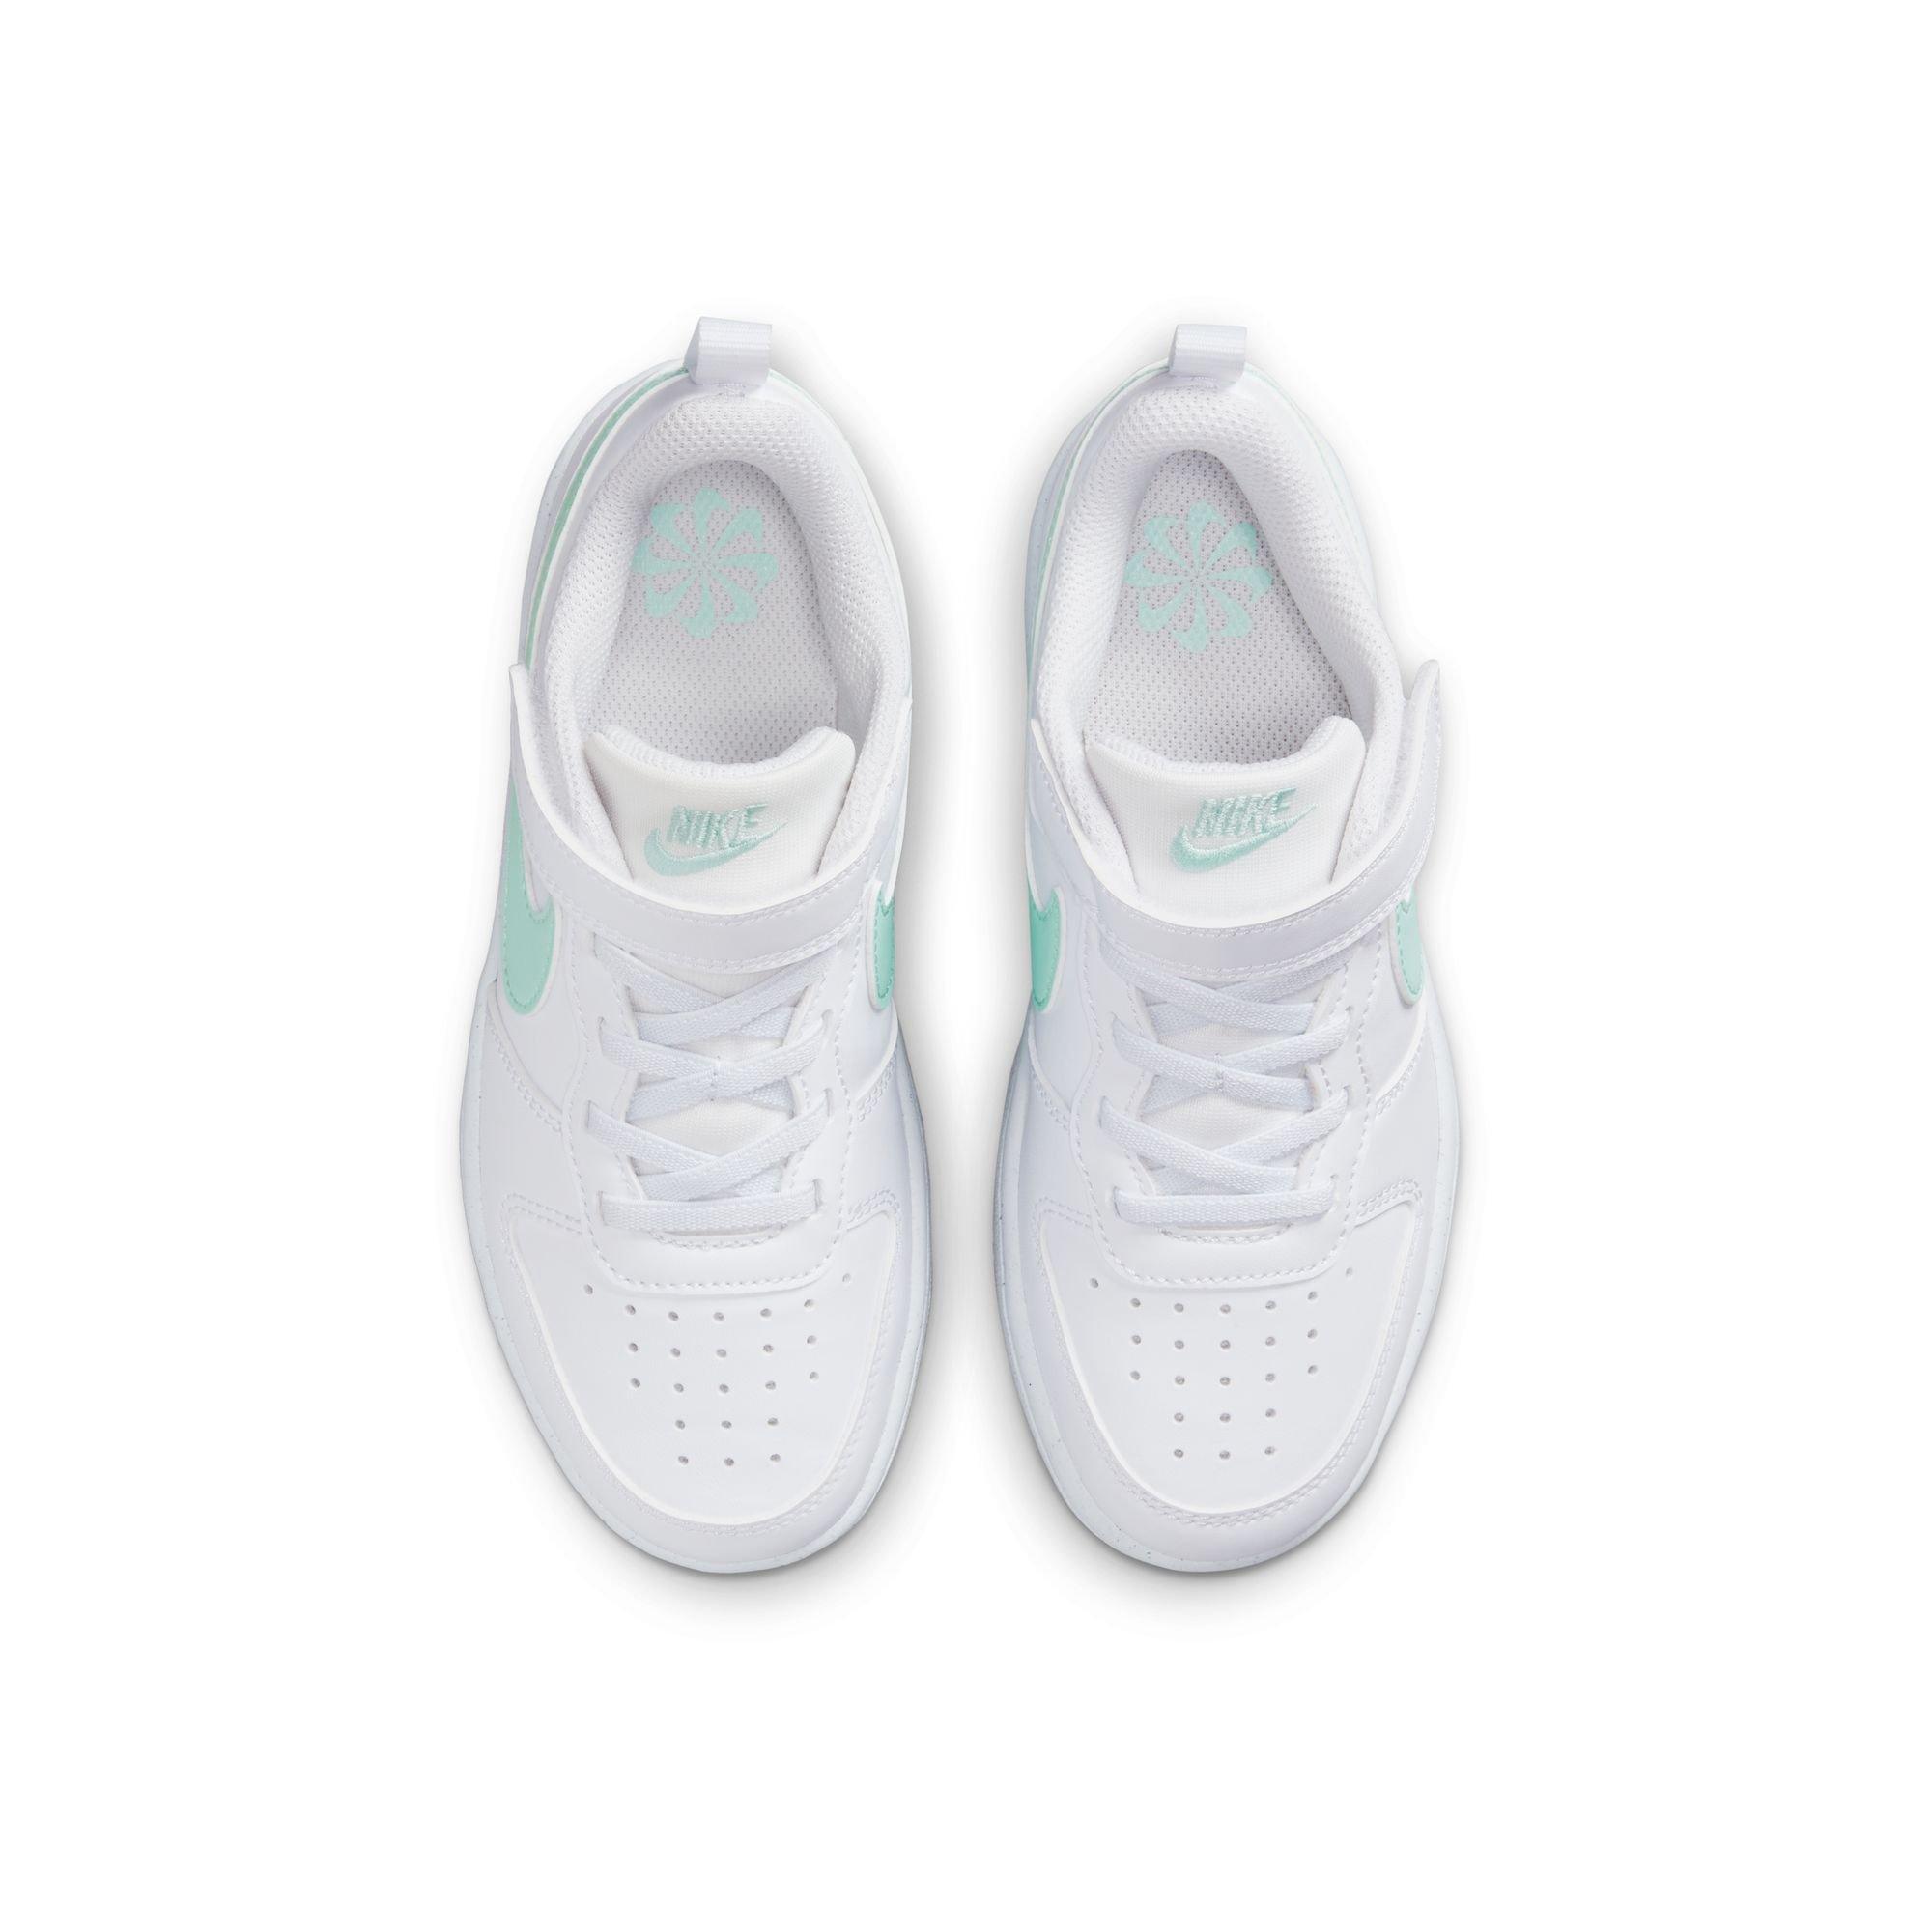 Nike Older Girls Court Borough Low Recraft Trainers - White/Green - Size 5 Older